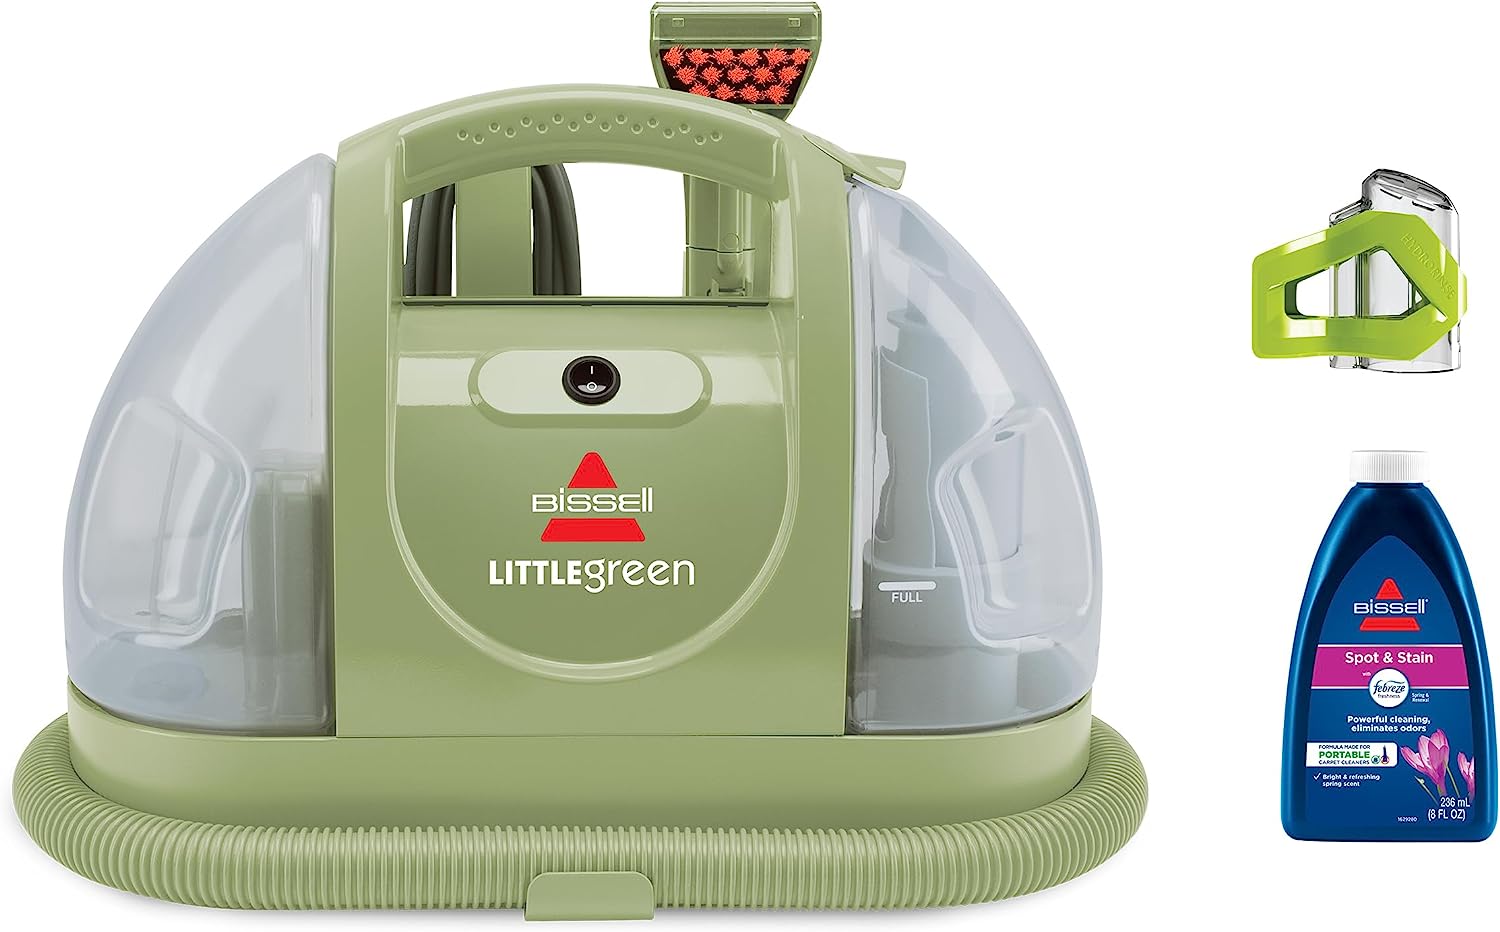 BISSELL-Little-Green-Carpet-Upholstery-Cleaner